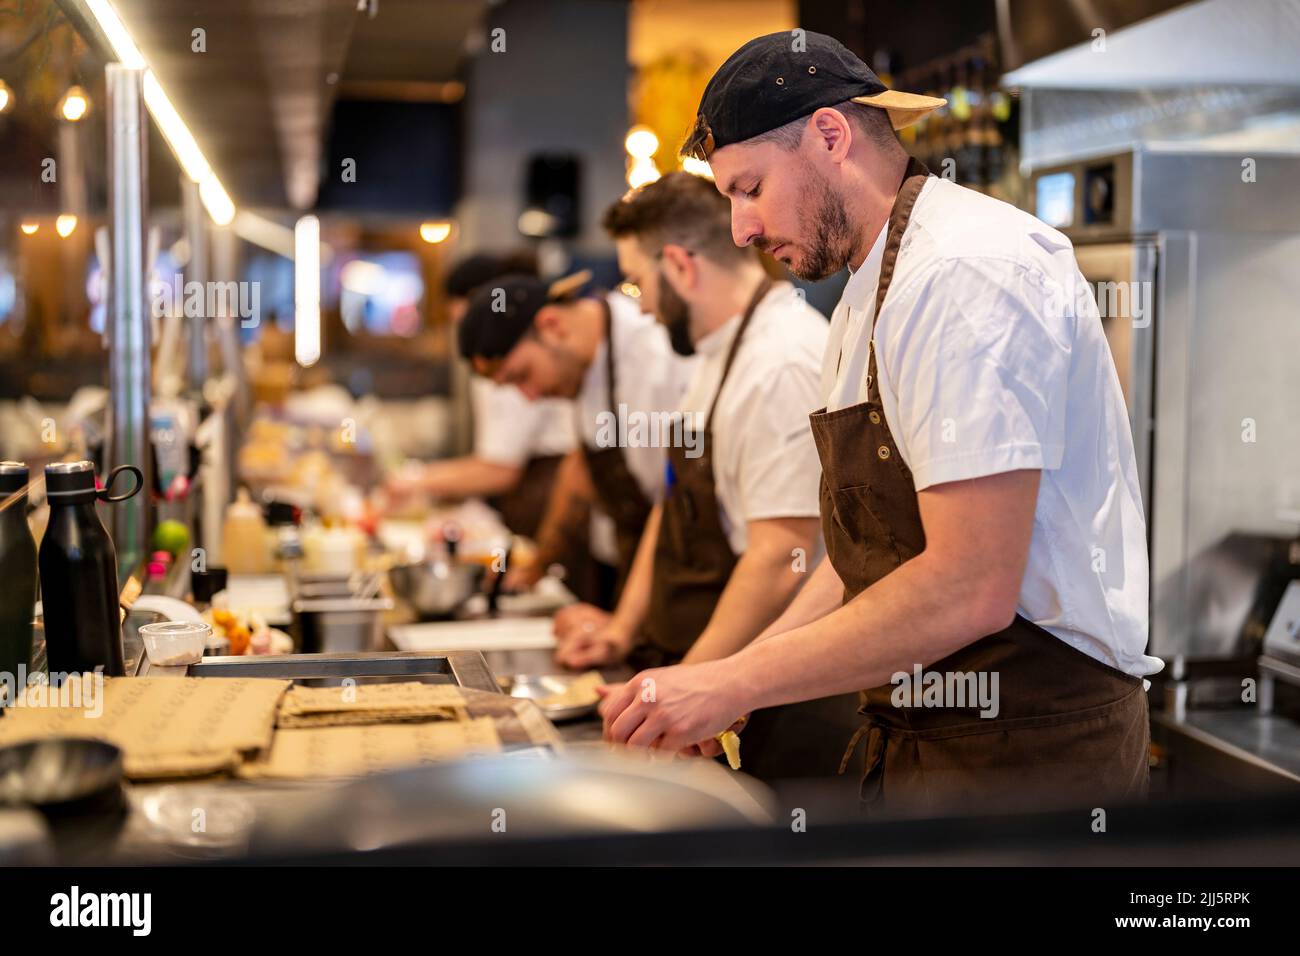 Chef standing by colleagues working at restaurant Stock Photo